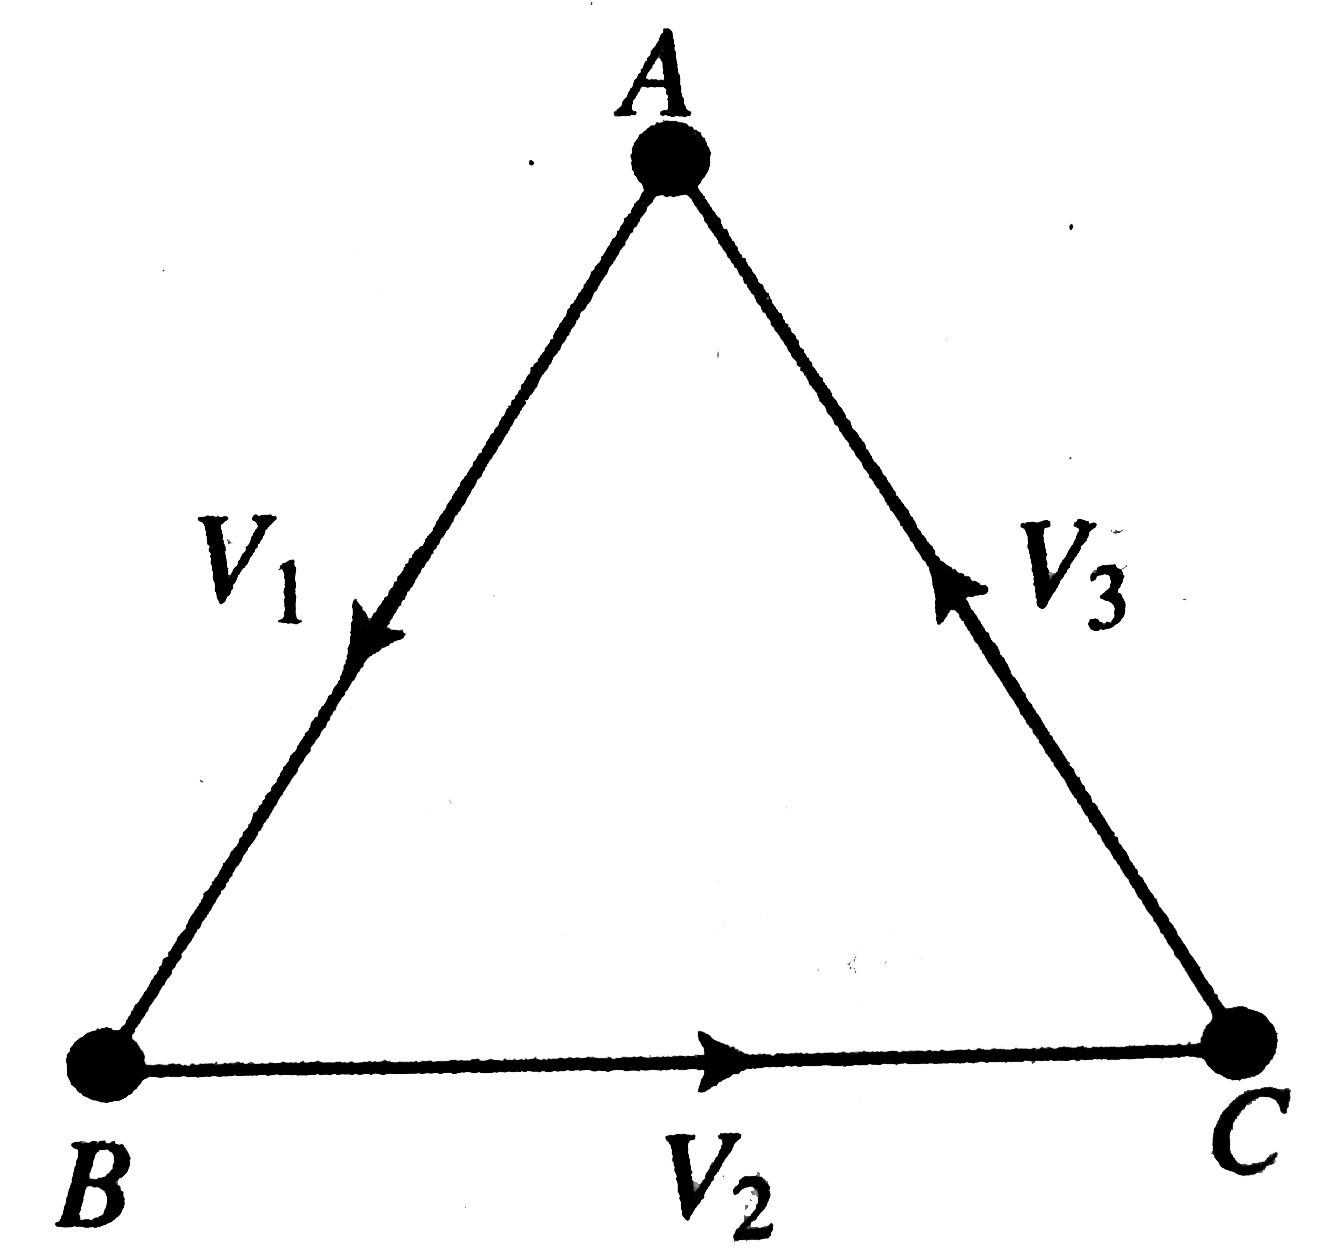 Three particles of equal masses are placed at the corners of an equilateral triangle as shown in the figure. Now particle A starts with a velocity v(1) towards line AB, particle B starts with a velocity v(2) towards line BC and particle C starts with velocity v(3) towards line CA. The displacement of CM of three particle A, B and C after time t will be (given if v(1)=v(2)=v(3))